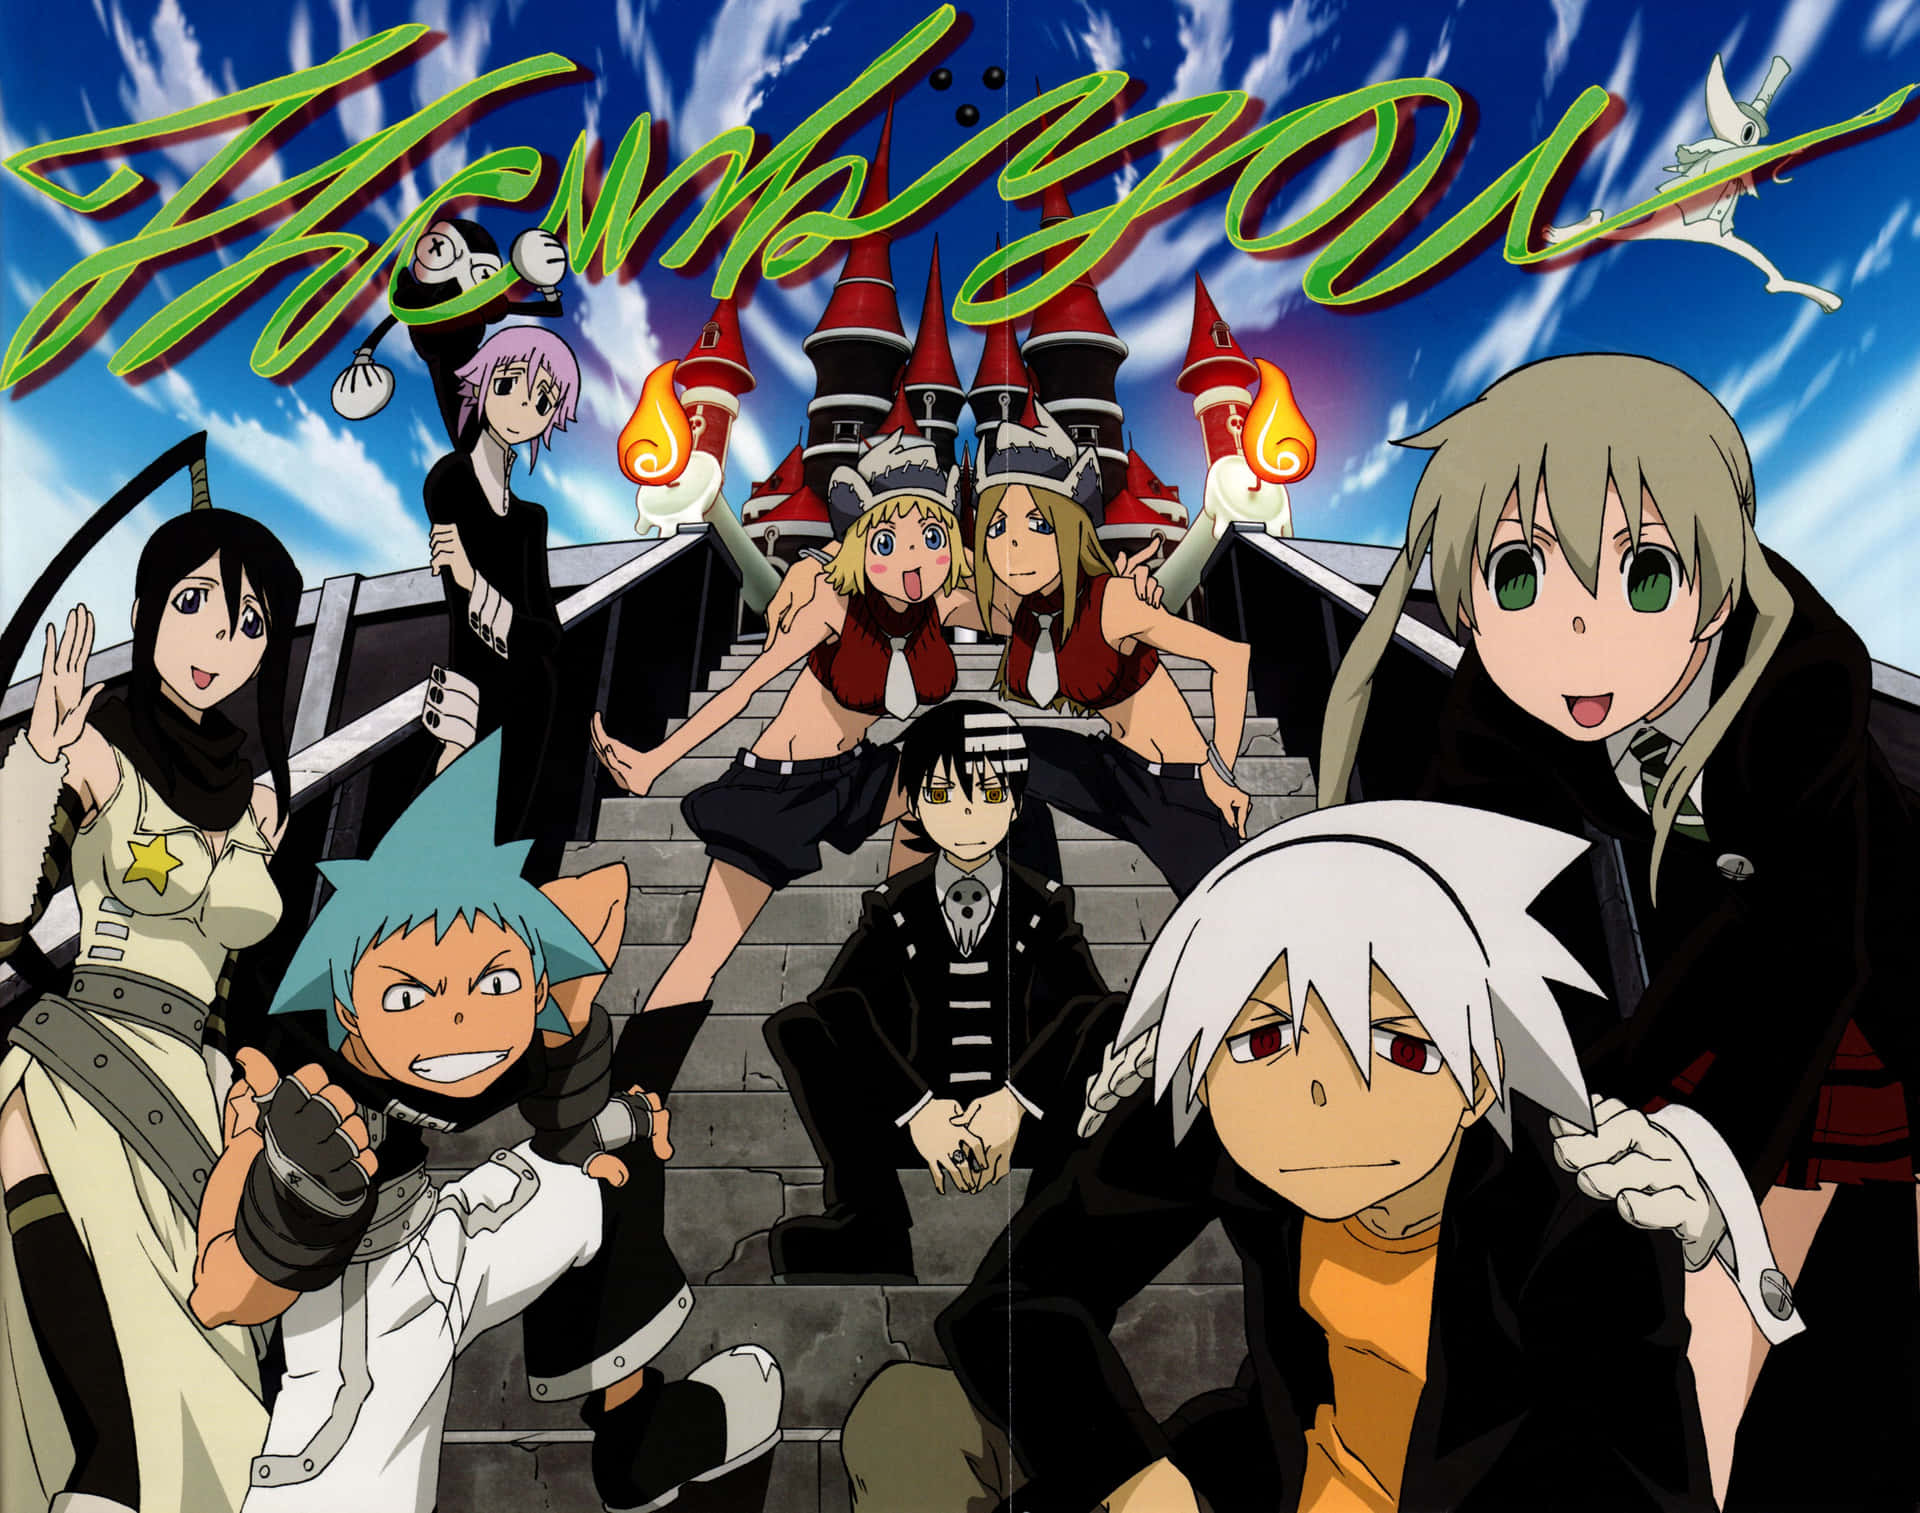 "A Soul Eater Shining With Power"